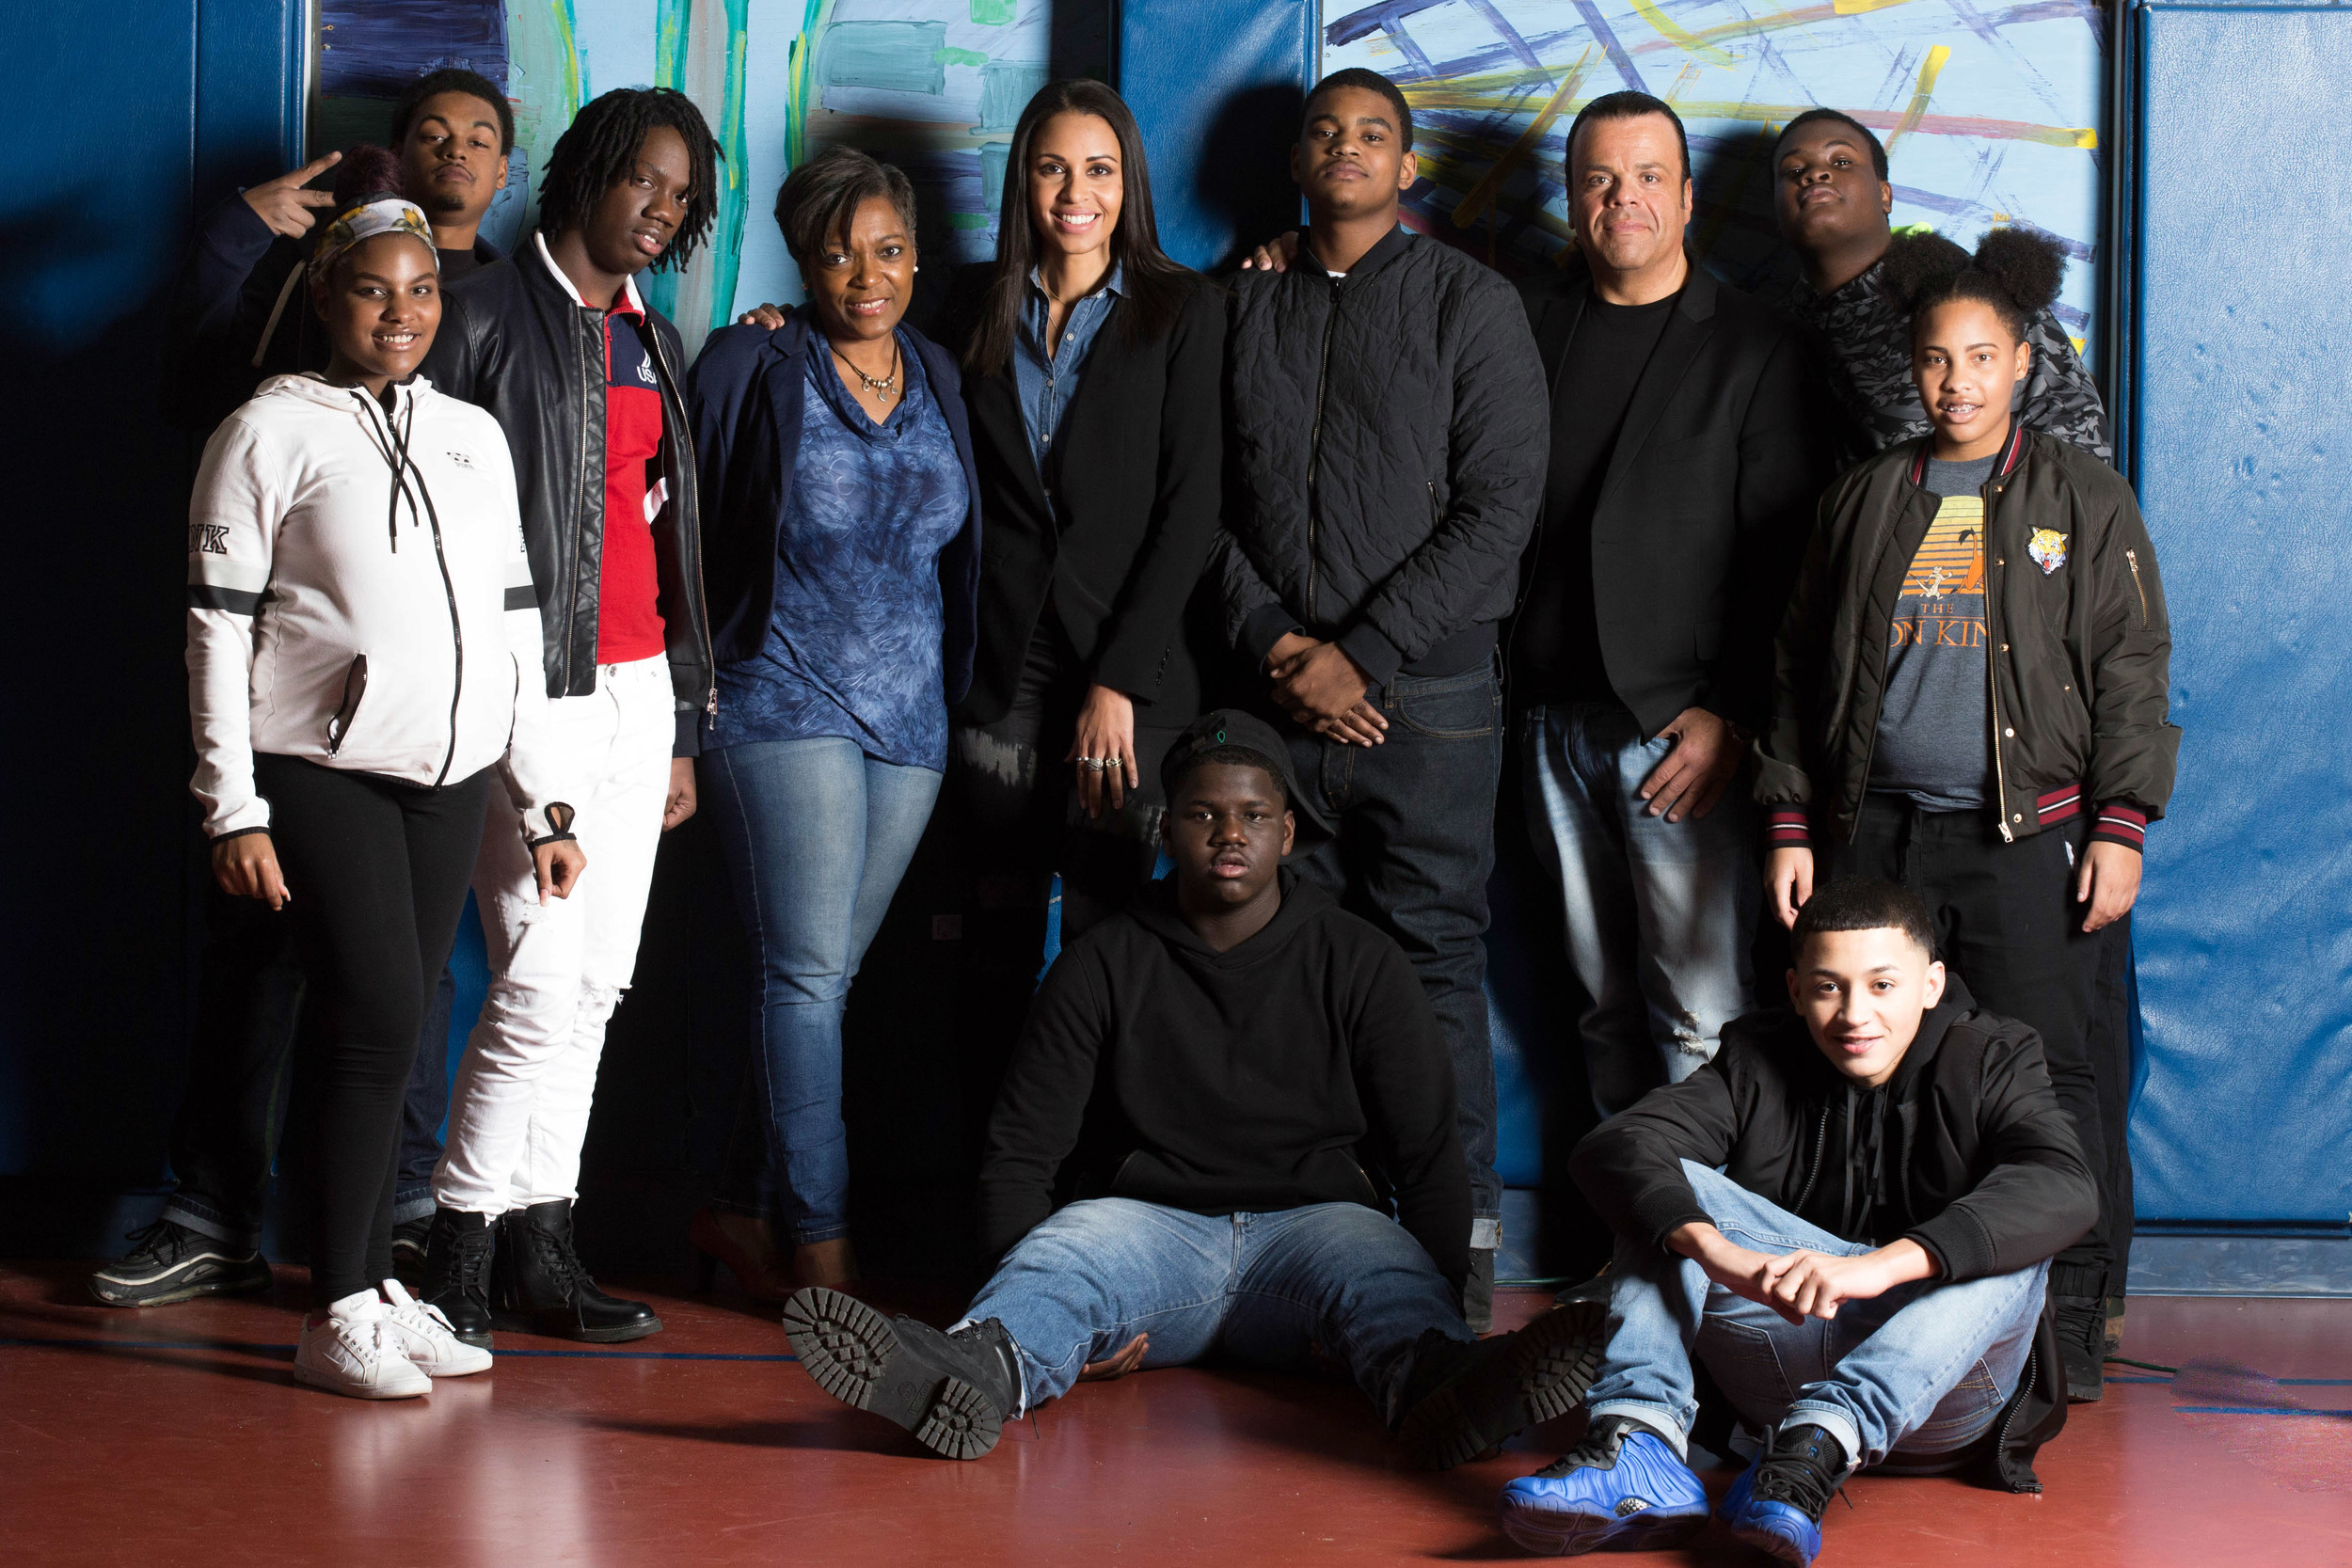 The young adults interviewed in “PEI Kids: Generation Change” posed for a group photo.